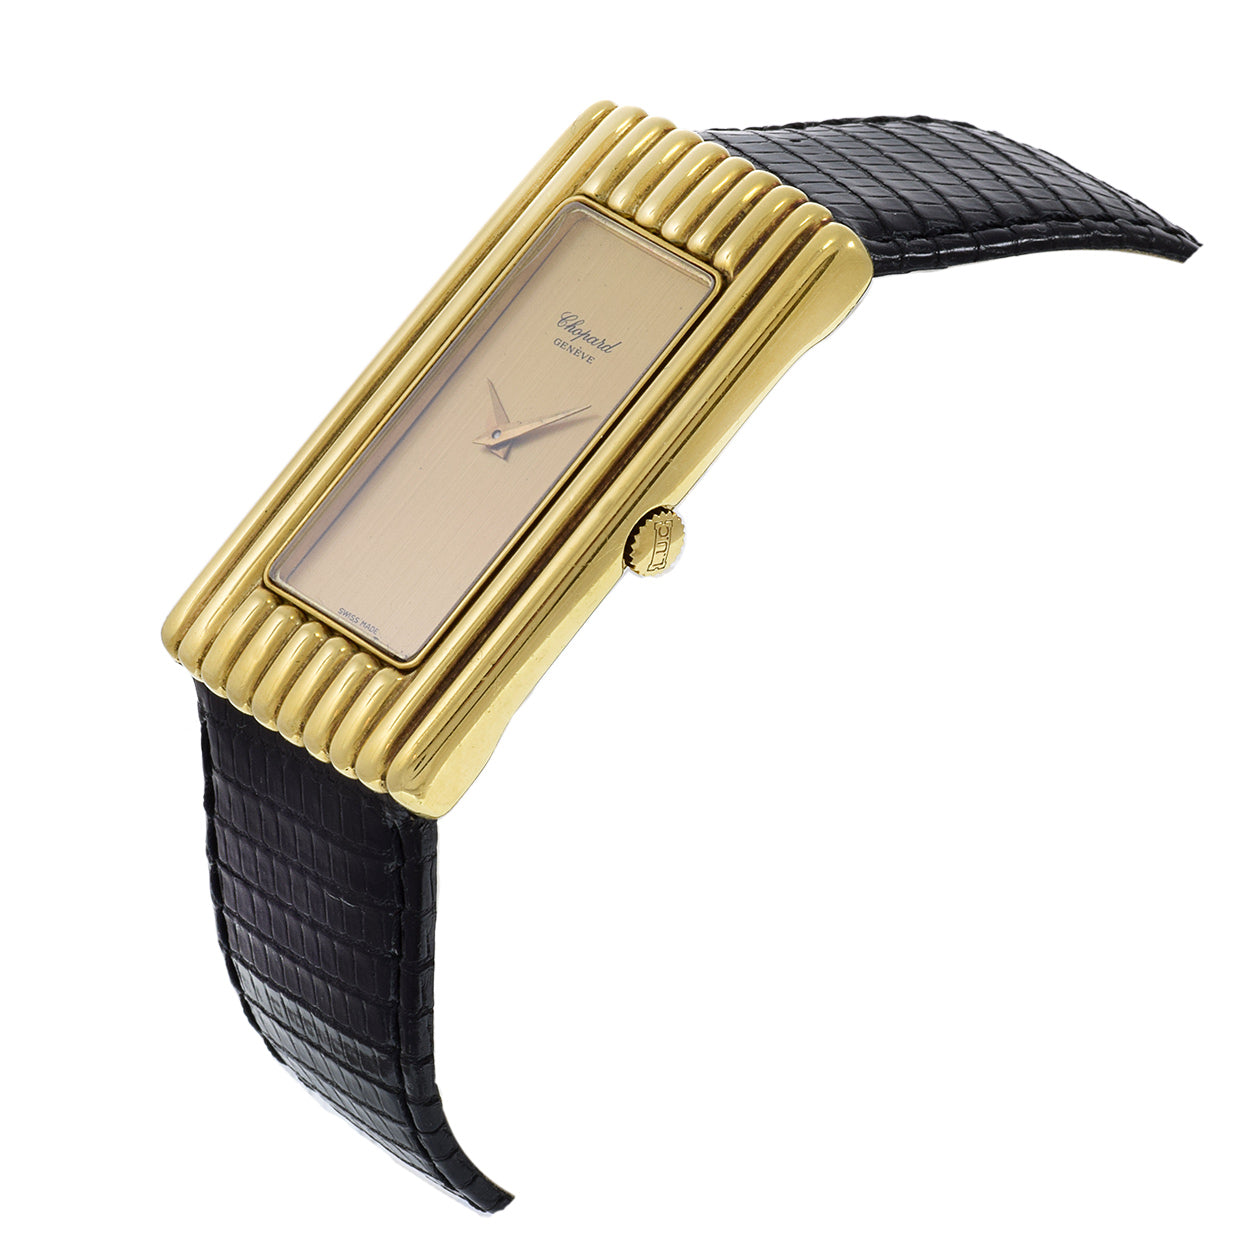 Vintage 1970's Chopard 79904 / 5058 18KT Yellow Gold watch